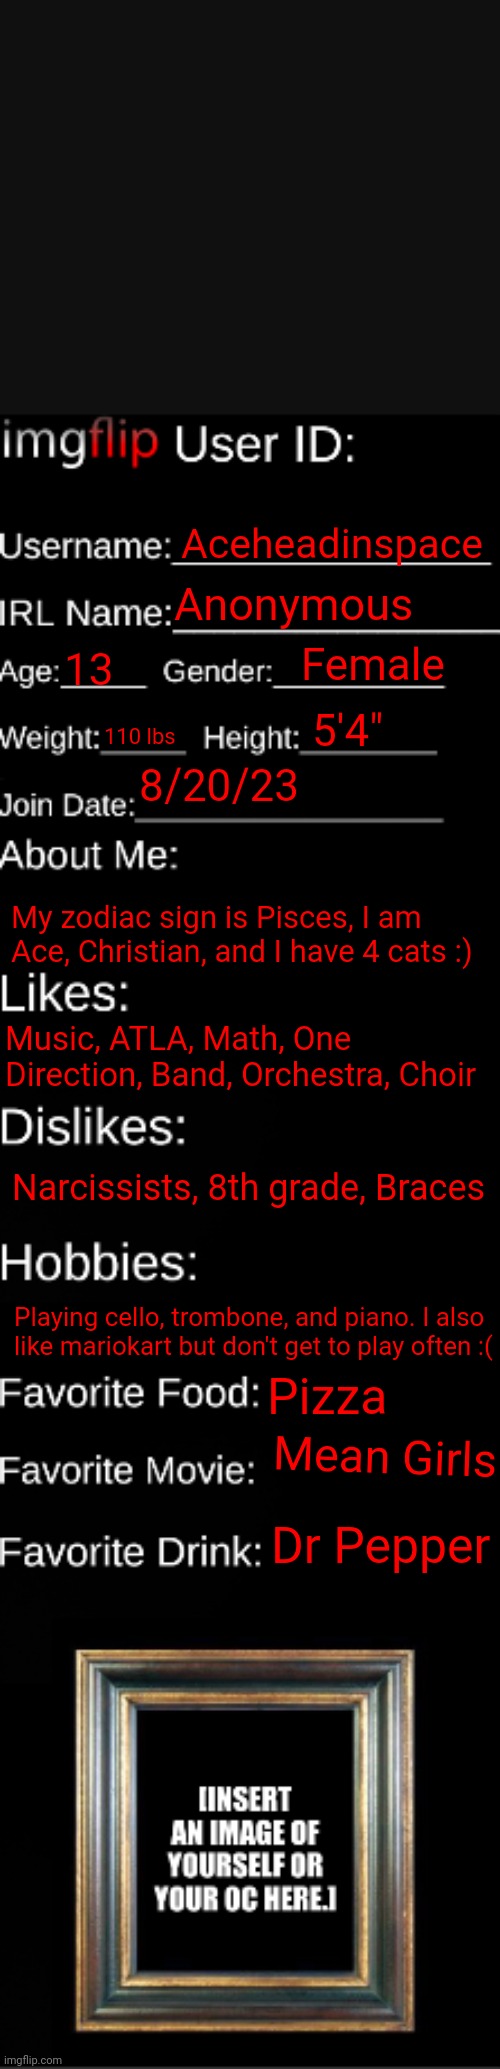 imgflip ID Card | Aceheadinspace; Anonymous; Female; 13; 5'4"; 110 lbs; 8/20/23; My zodiac sign is Pisces, I am Ace, Christian, and I have 4 cats :); Music, ATLA, Math, One Direction, Band, Orchestra, Choir; Narcissists, 8th grade, Braces; Playing cello, trombone, and piano. I also like mariokart but don't get to play often :(; Pizza; Mean Girls; Dr Pepper | image tagged in imgflip id card | made w/ Imgflip meme maker